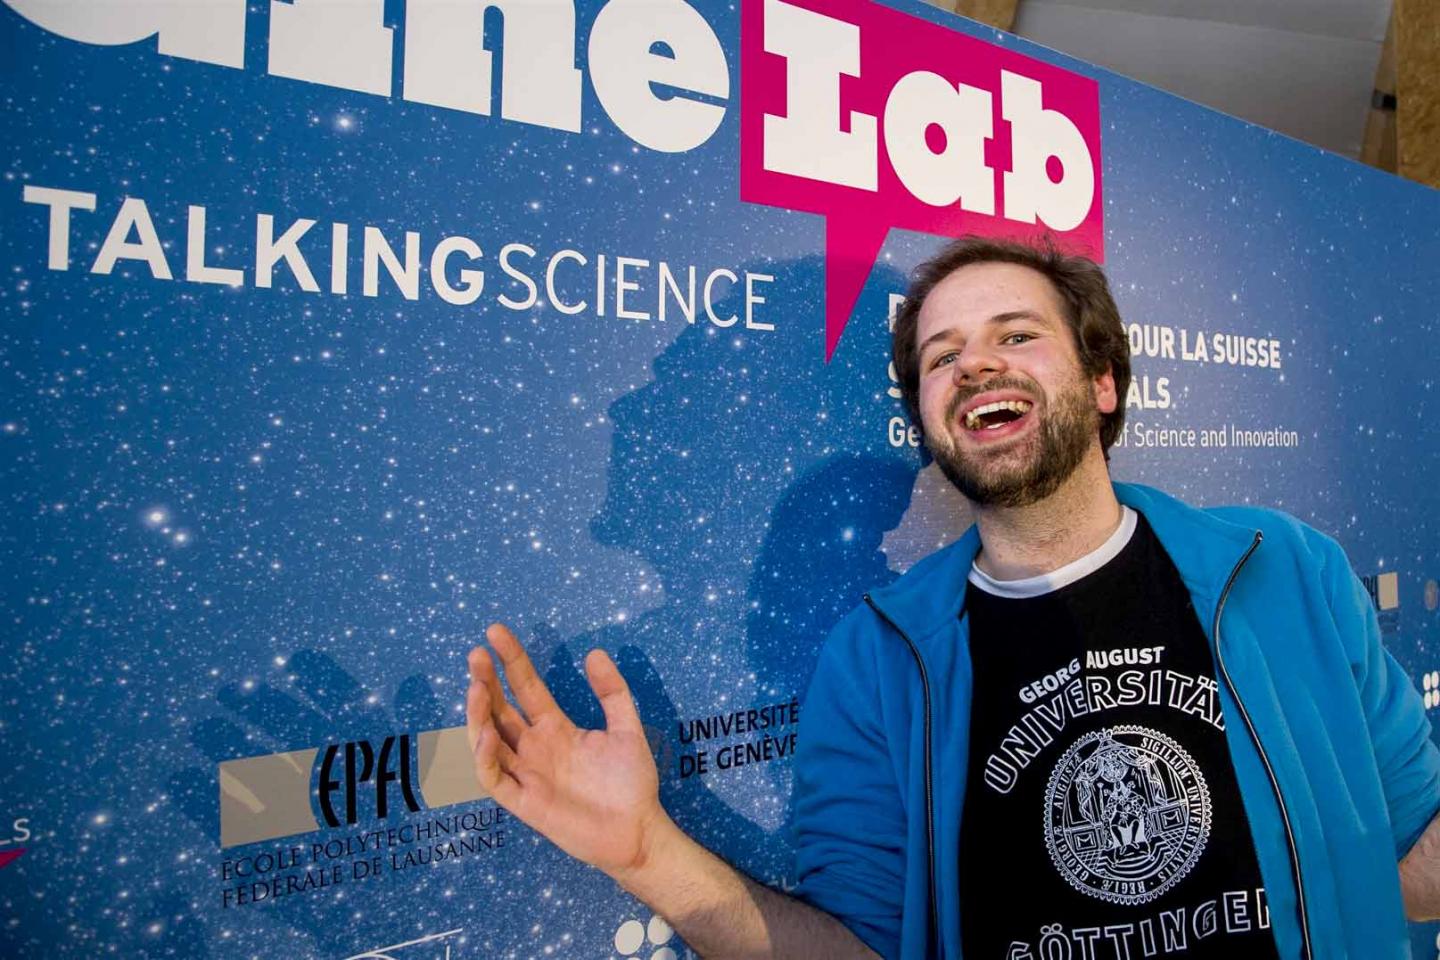 Register for FameLab: your chance to talk science